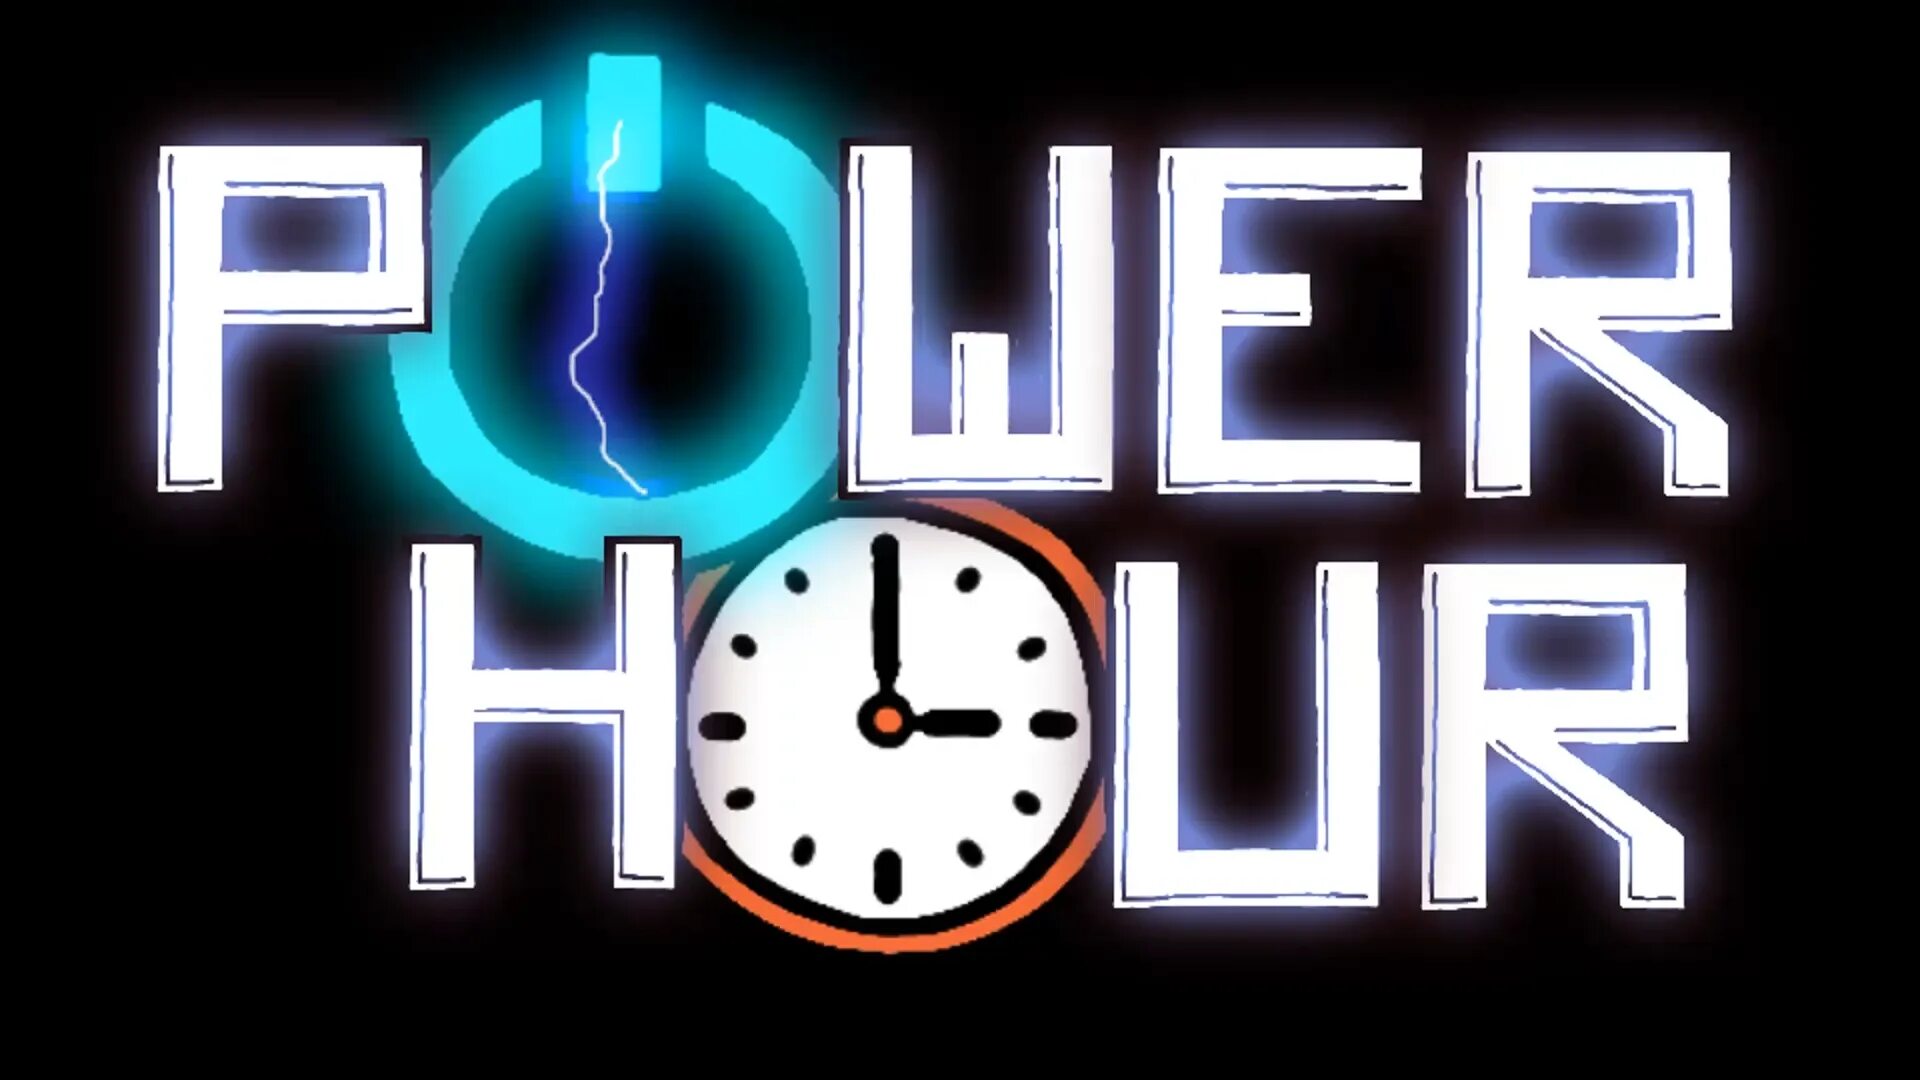 Short hour. Power hour. Power hour 2003. Power hour Music. Power hour #1 read.